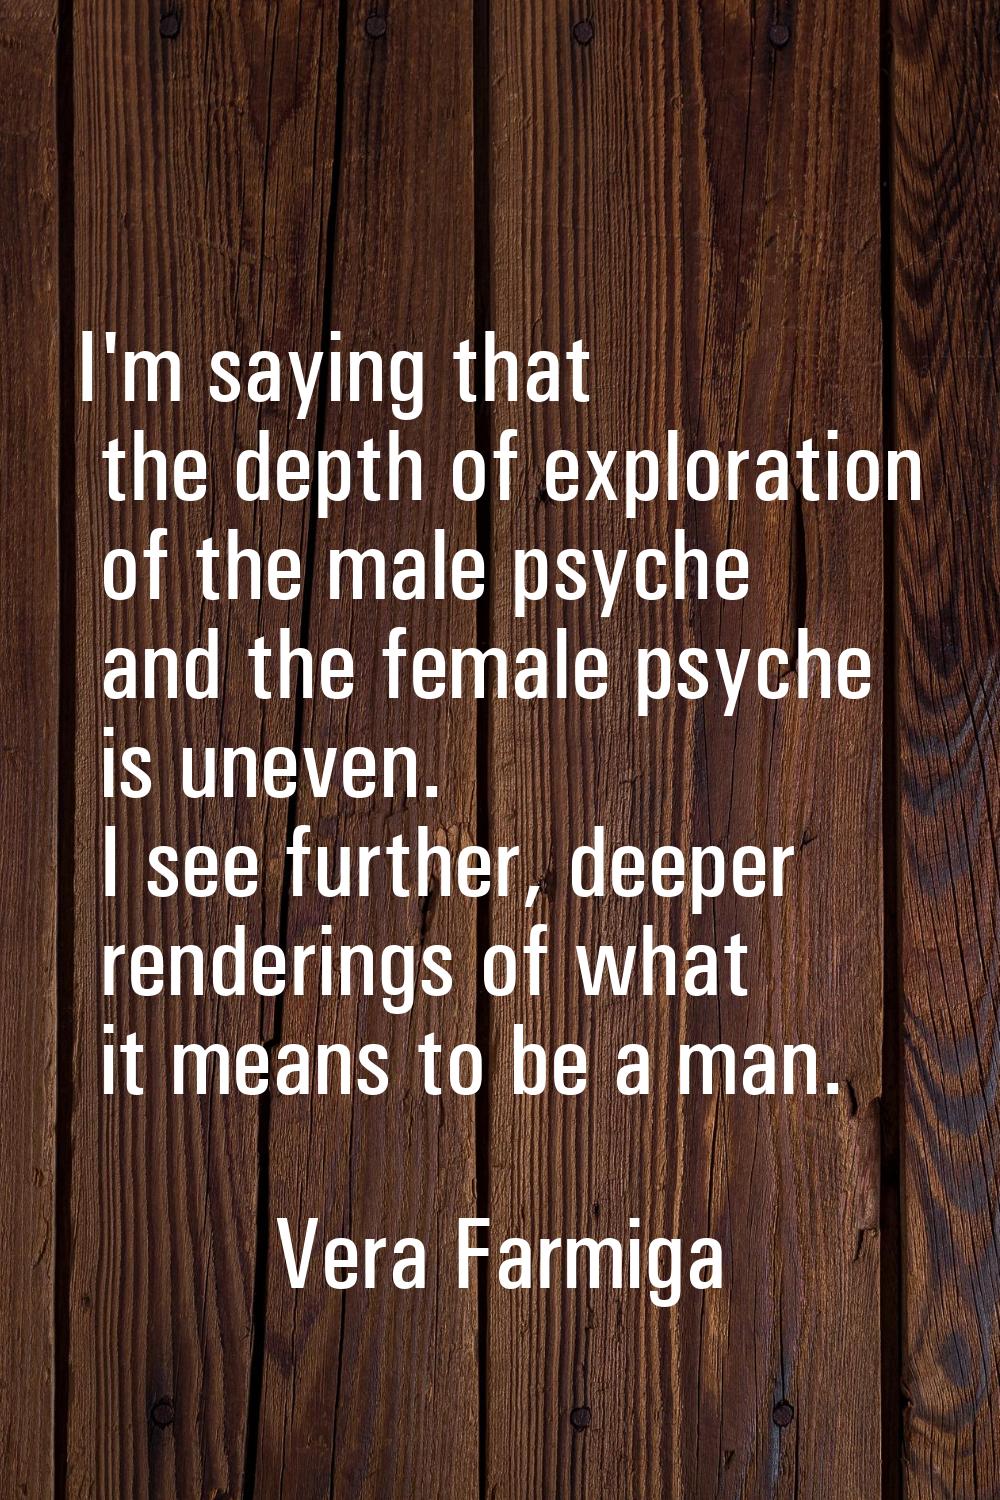 I'm saying that the depth of exploration of the male psyche and the female psyche is uneven. I see 